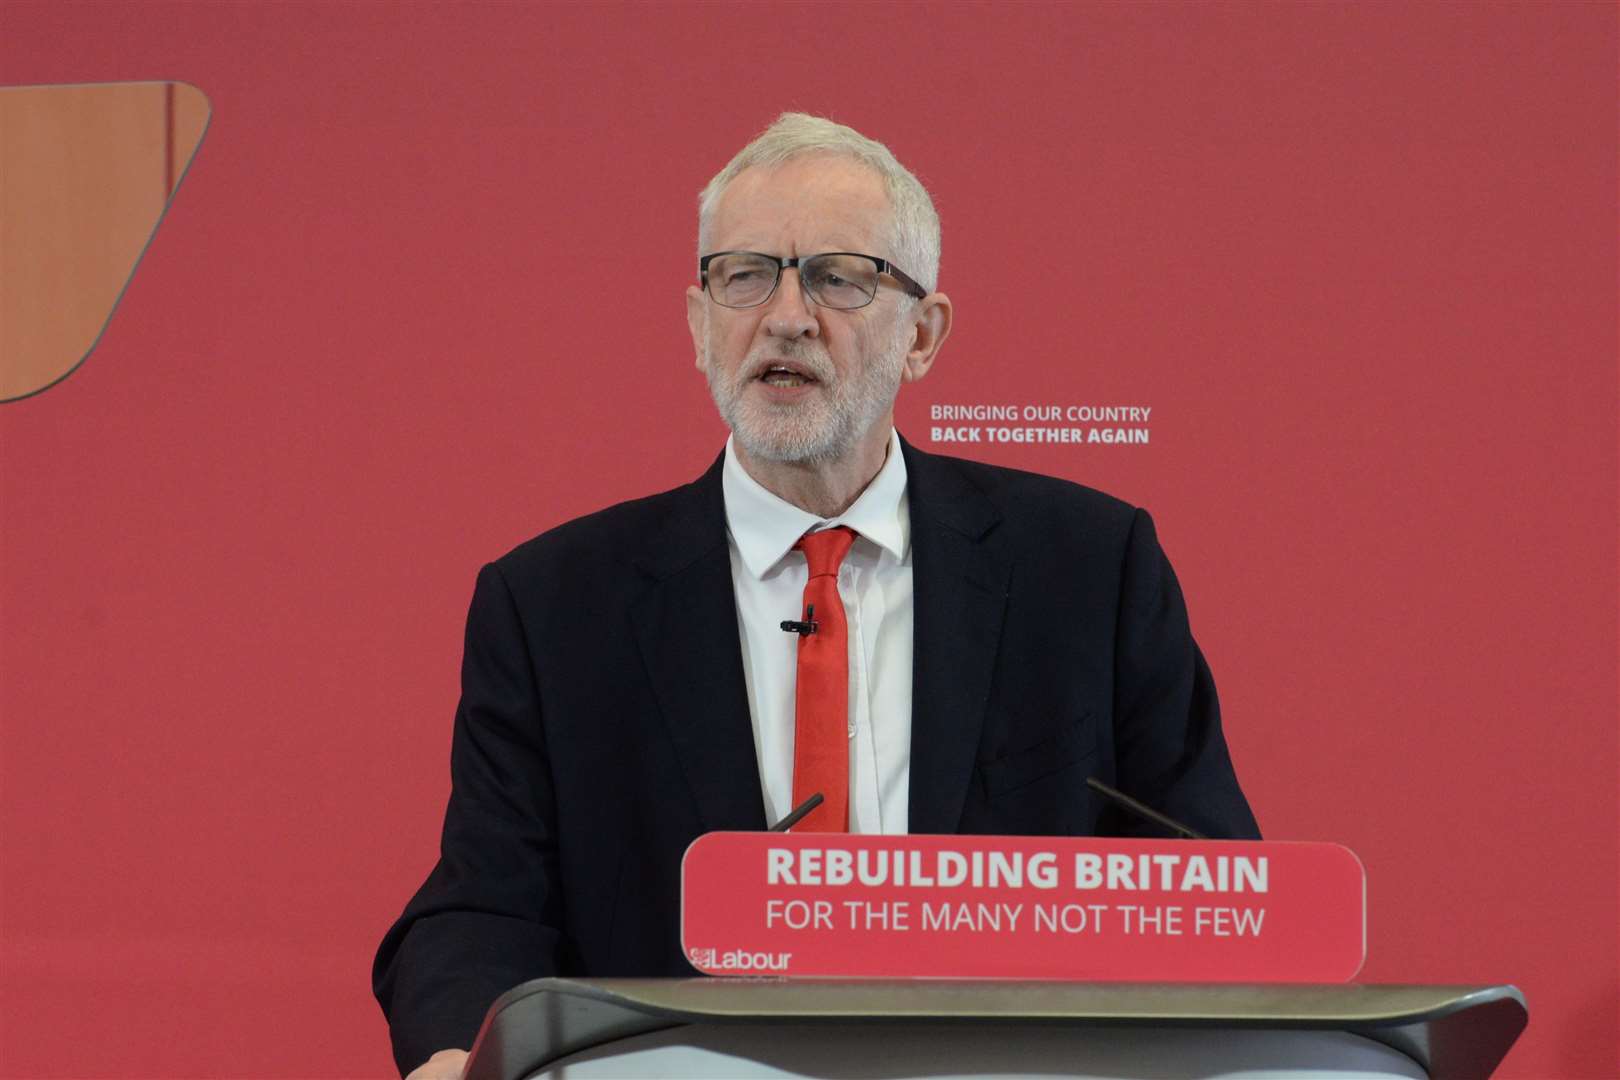 Jeremy Corbyn in Medway to launch the Labour manifesto ahead of the European elections